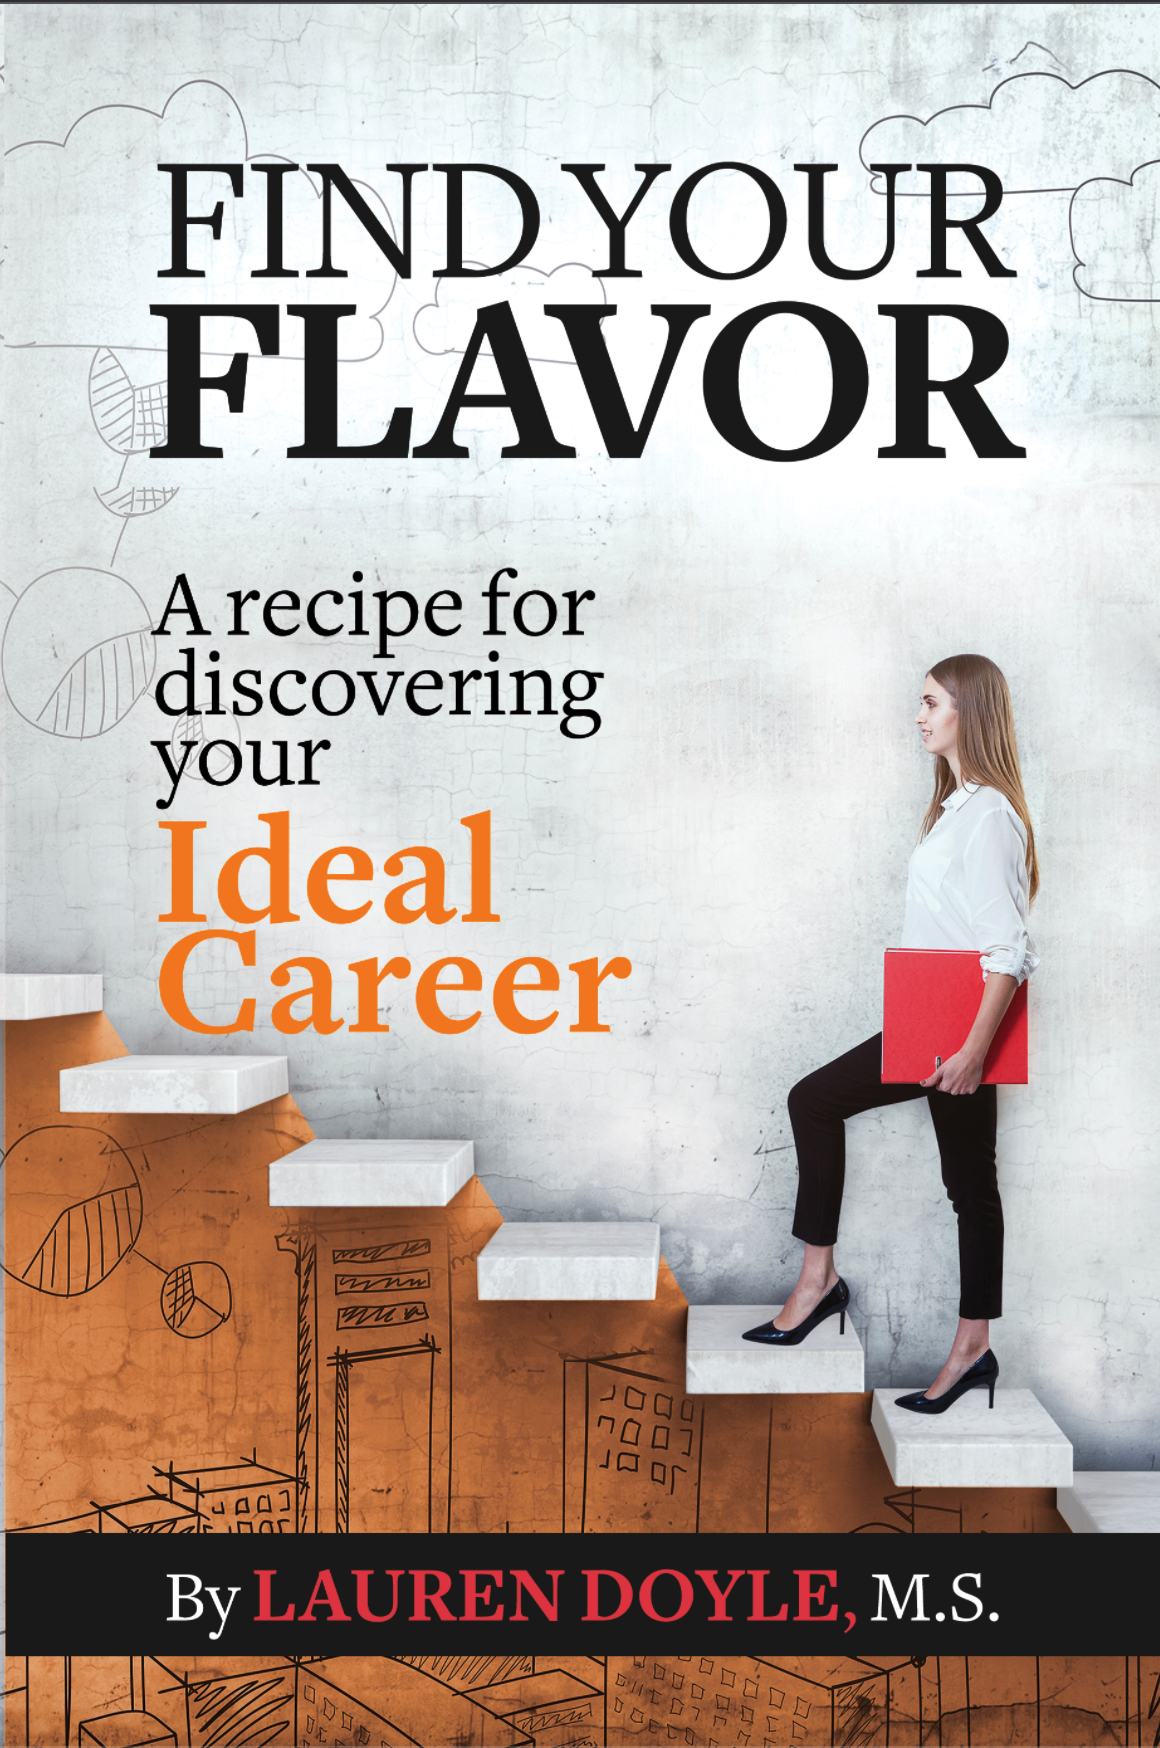 New book "Find Your Flavor: A Recipe for Discovering Your Ideal Career" by Lauren Doyle, M.S. is released, a step-by-step guide for finding a calling identifying an enduring career path